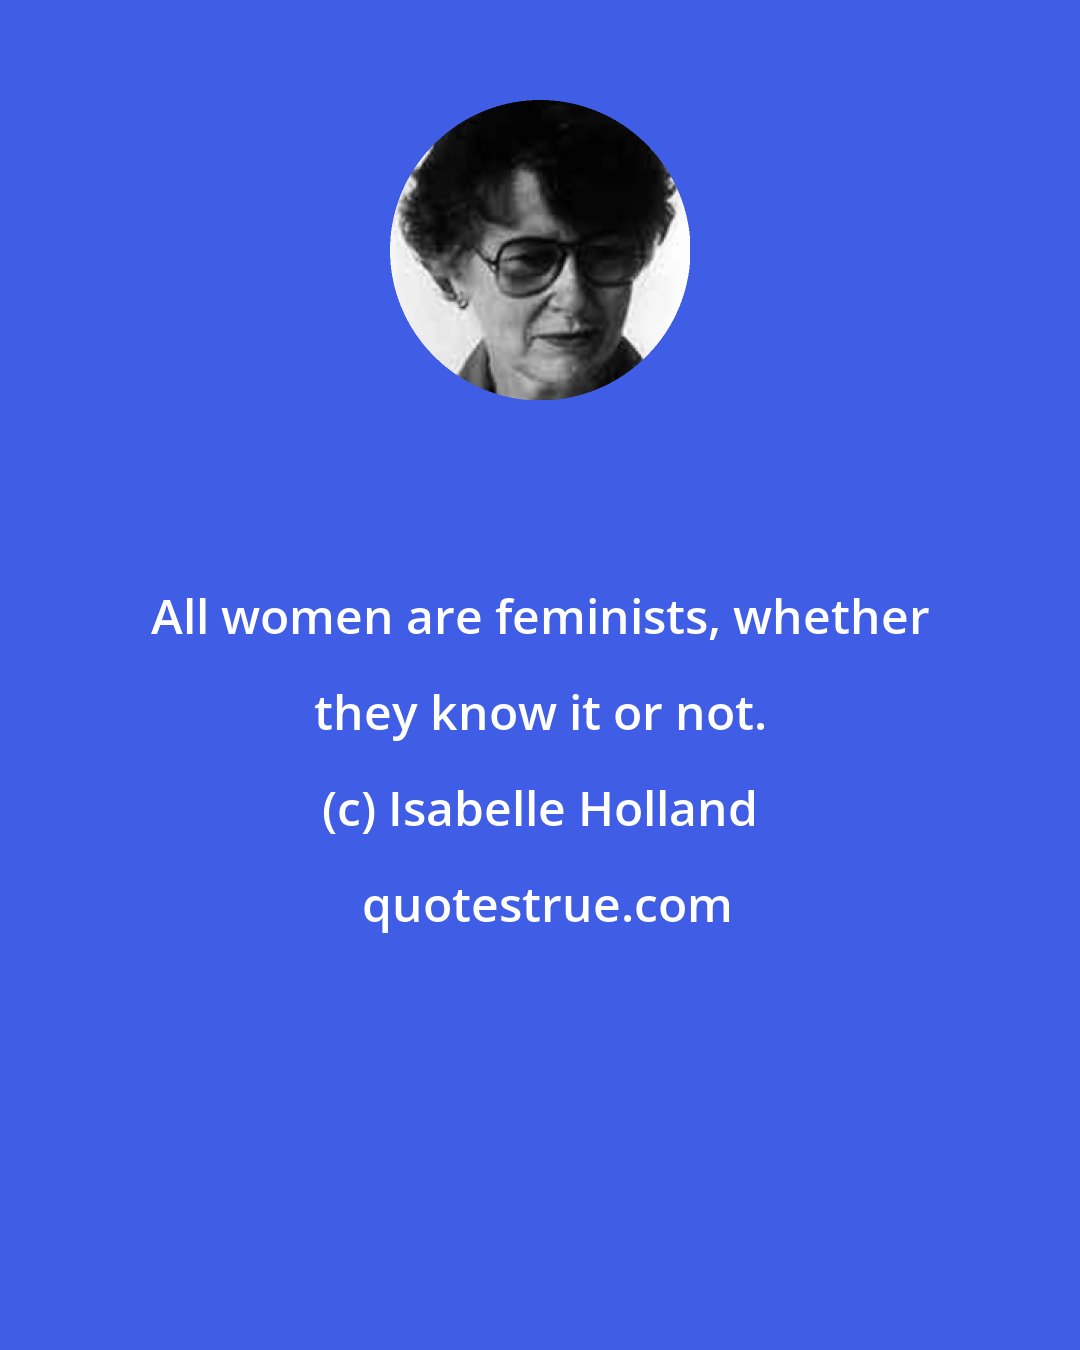 Isabelle Holland: All women are feminists, whether they know it or not.